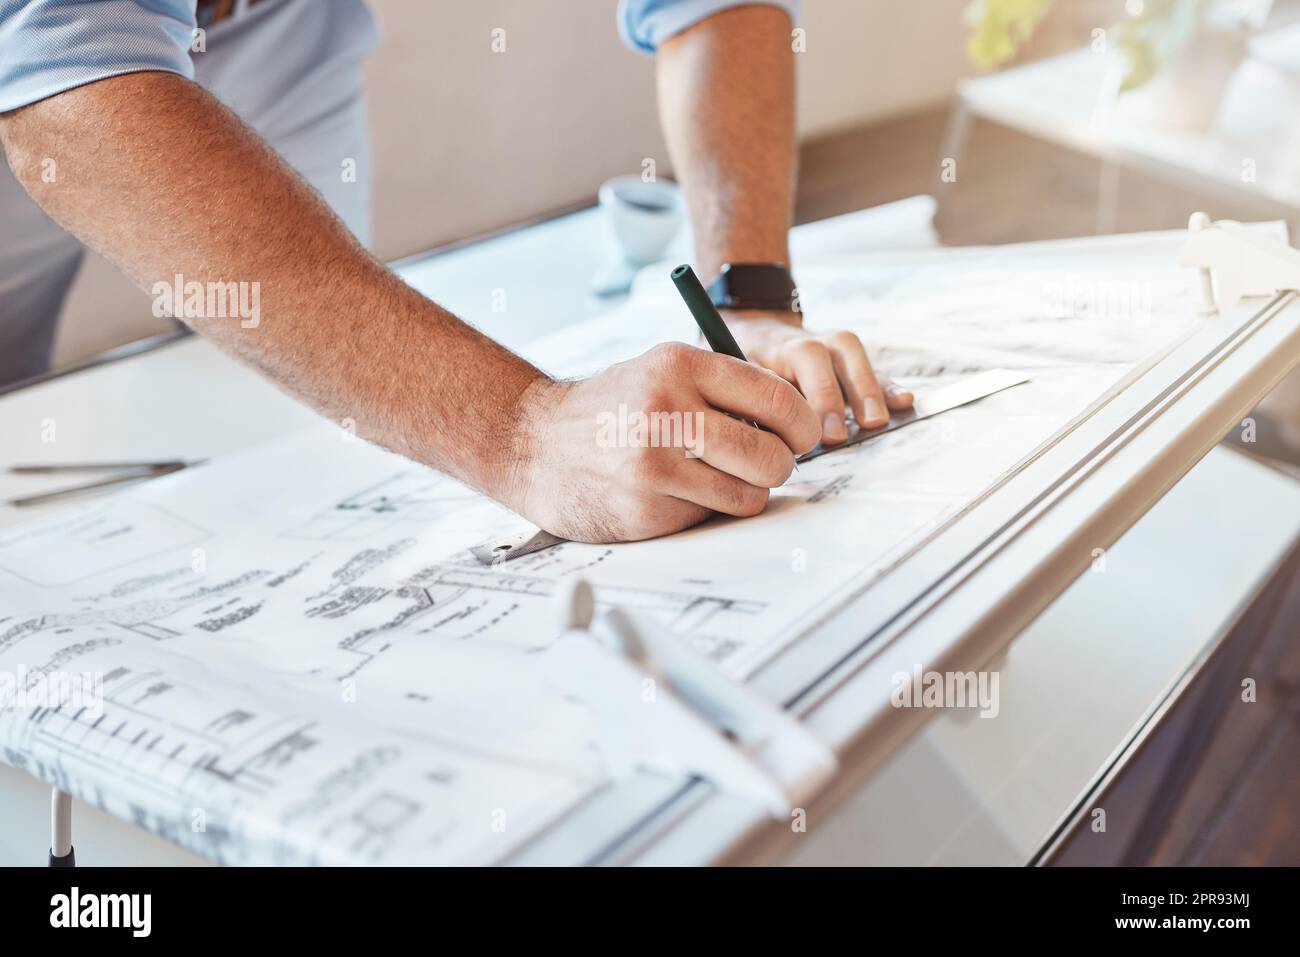 Male architect hands drawing building project or construction plan on an office table. Closeup of caucasian man taking measurement notes, sketching and making corrections to a blueprint. Stock Photo